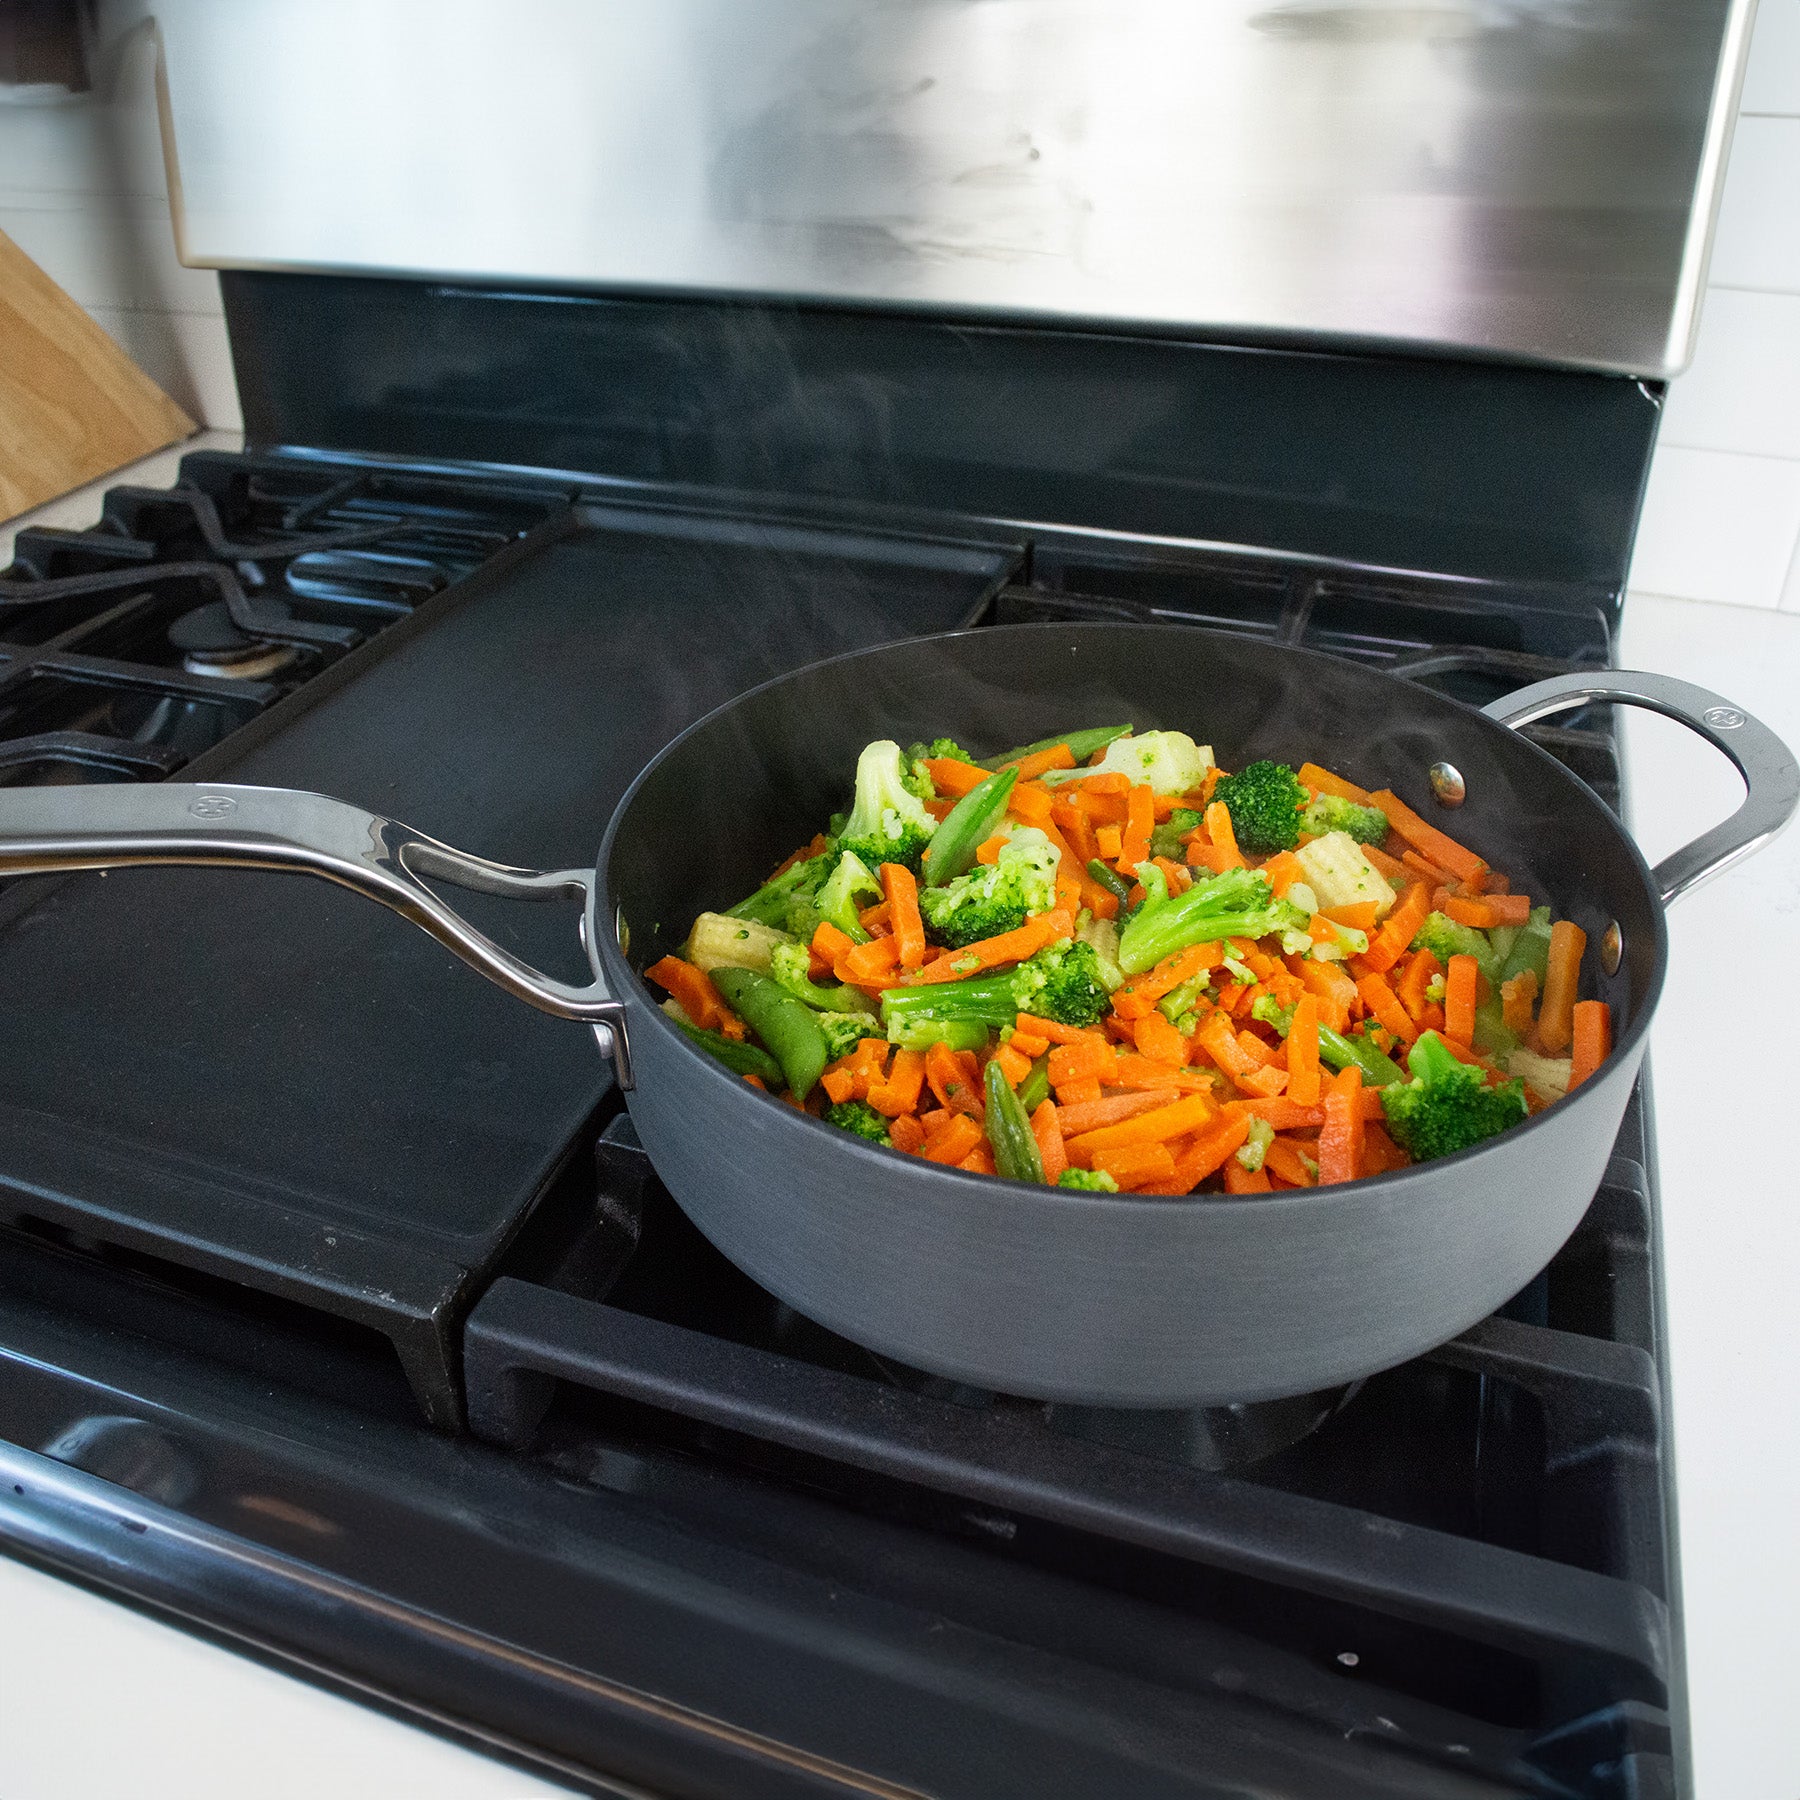 Hard Anodised Saute Pan - Induction in use on stove top